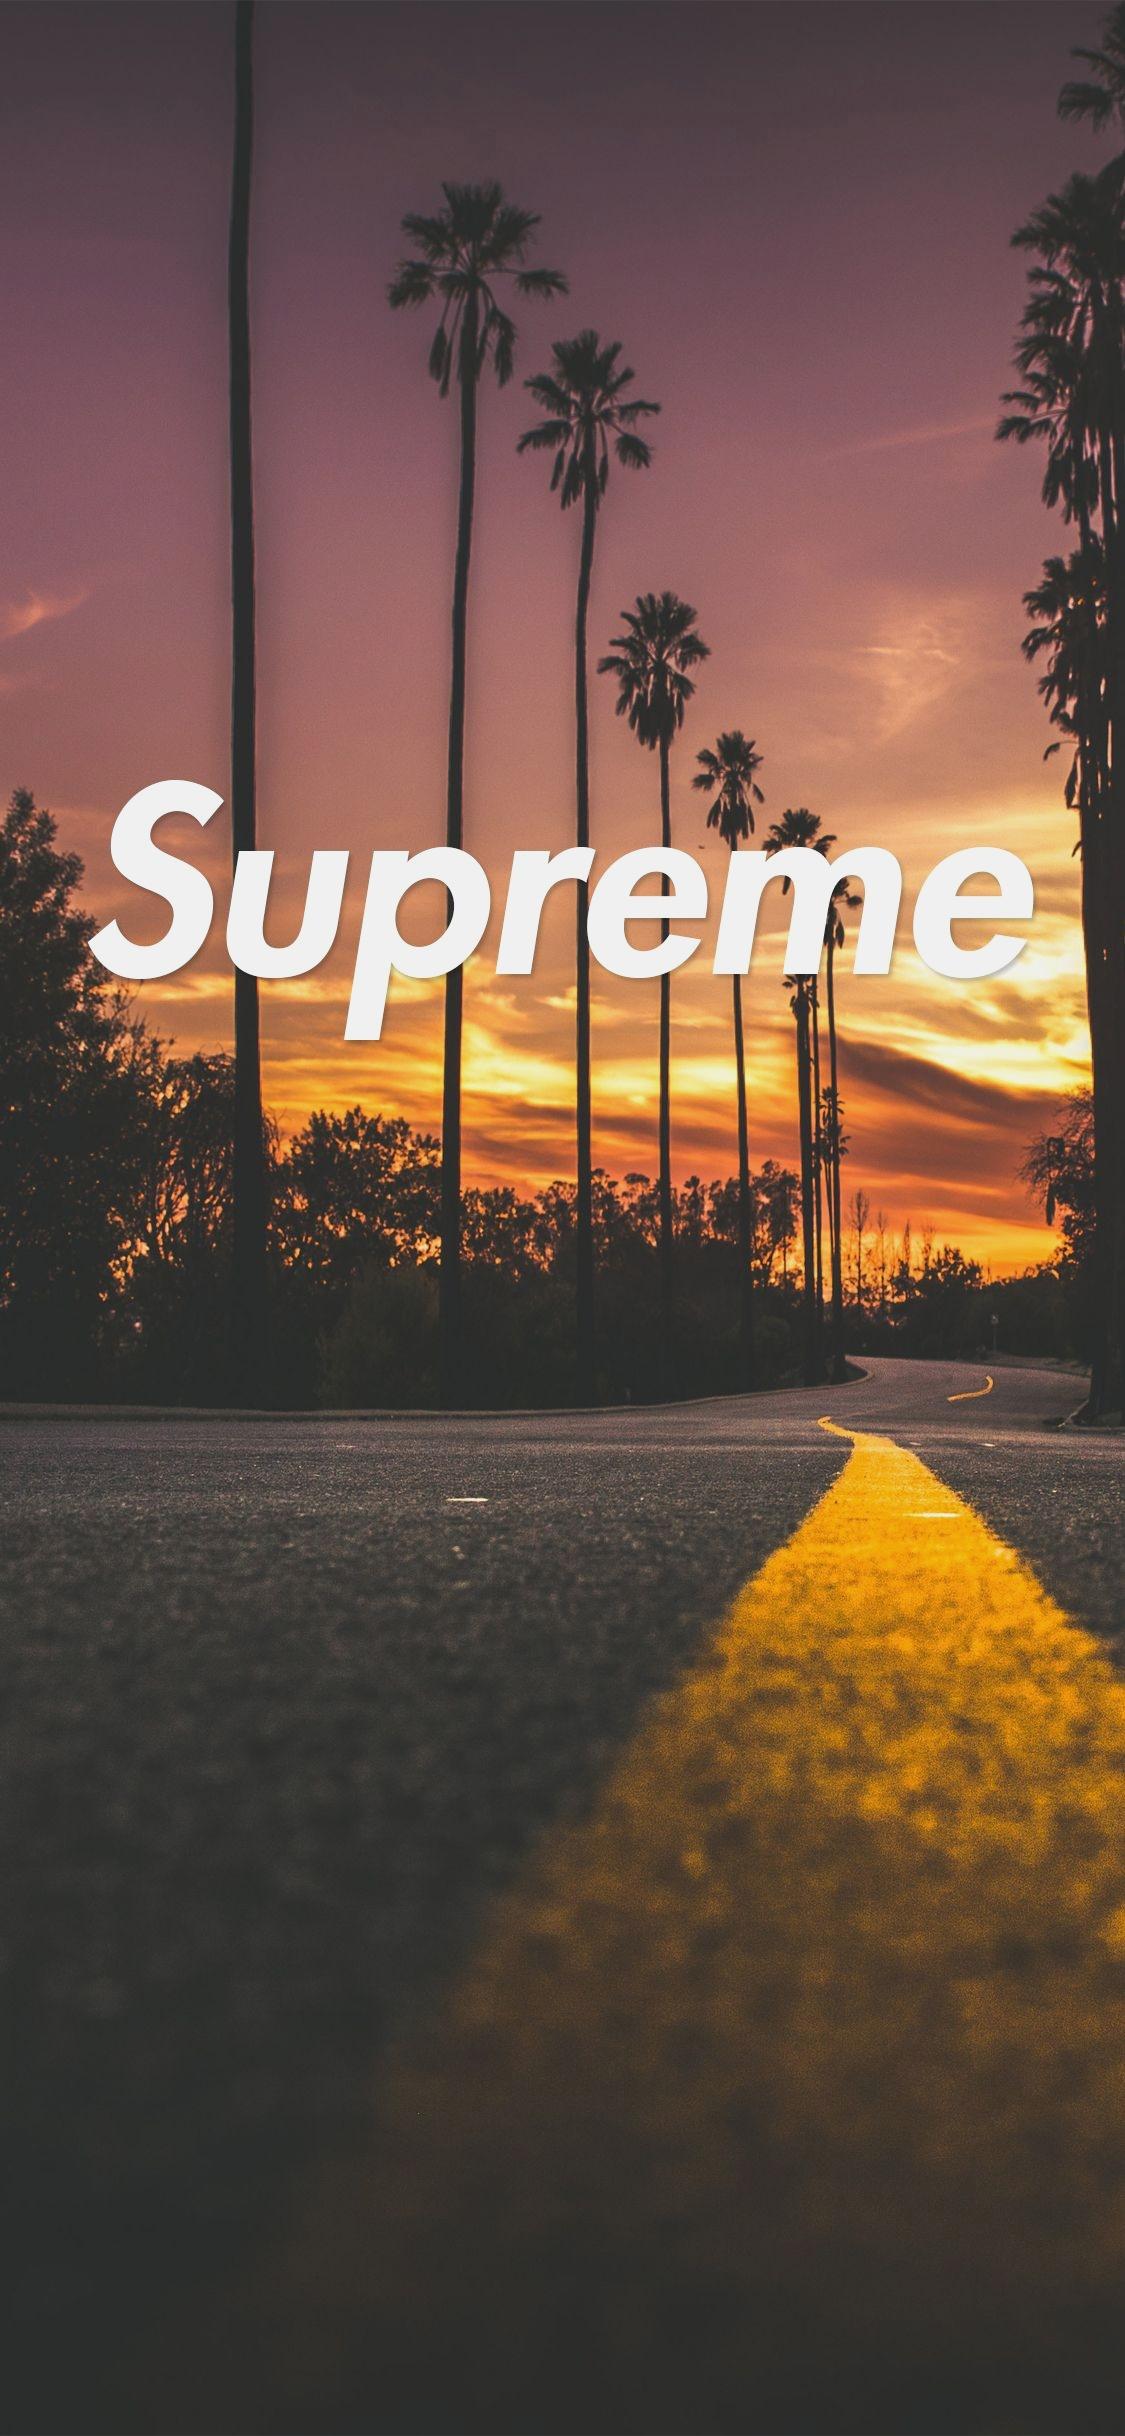 Supreme Cool Wallpaper iPhone Cute Cool For Wallpaper